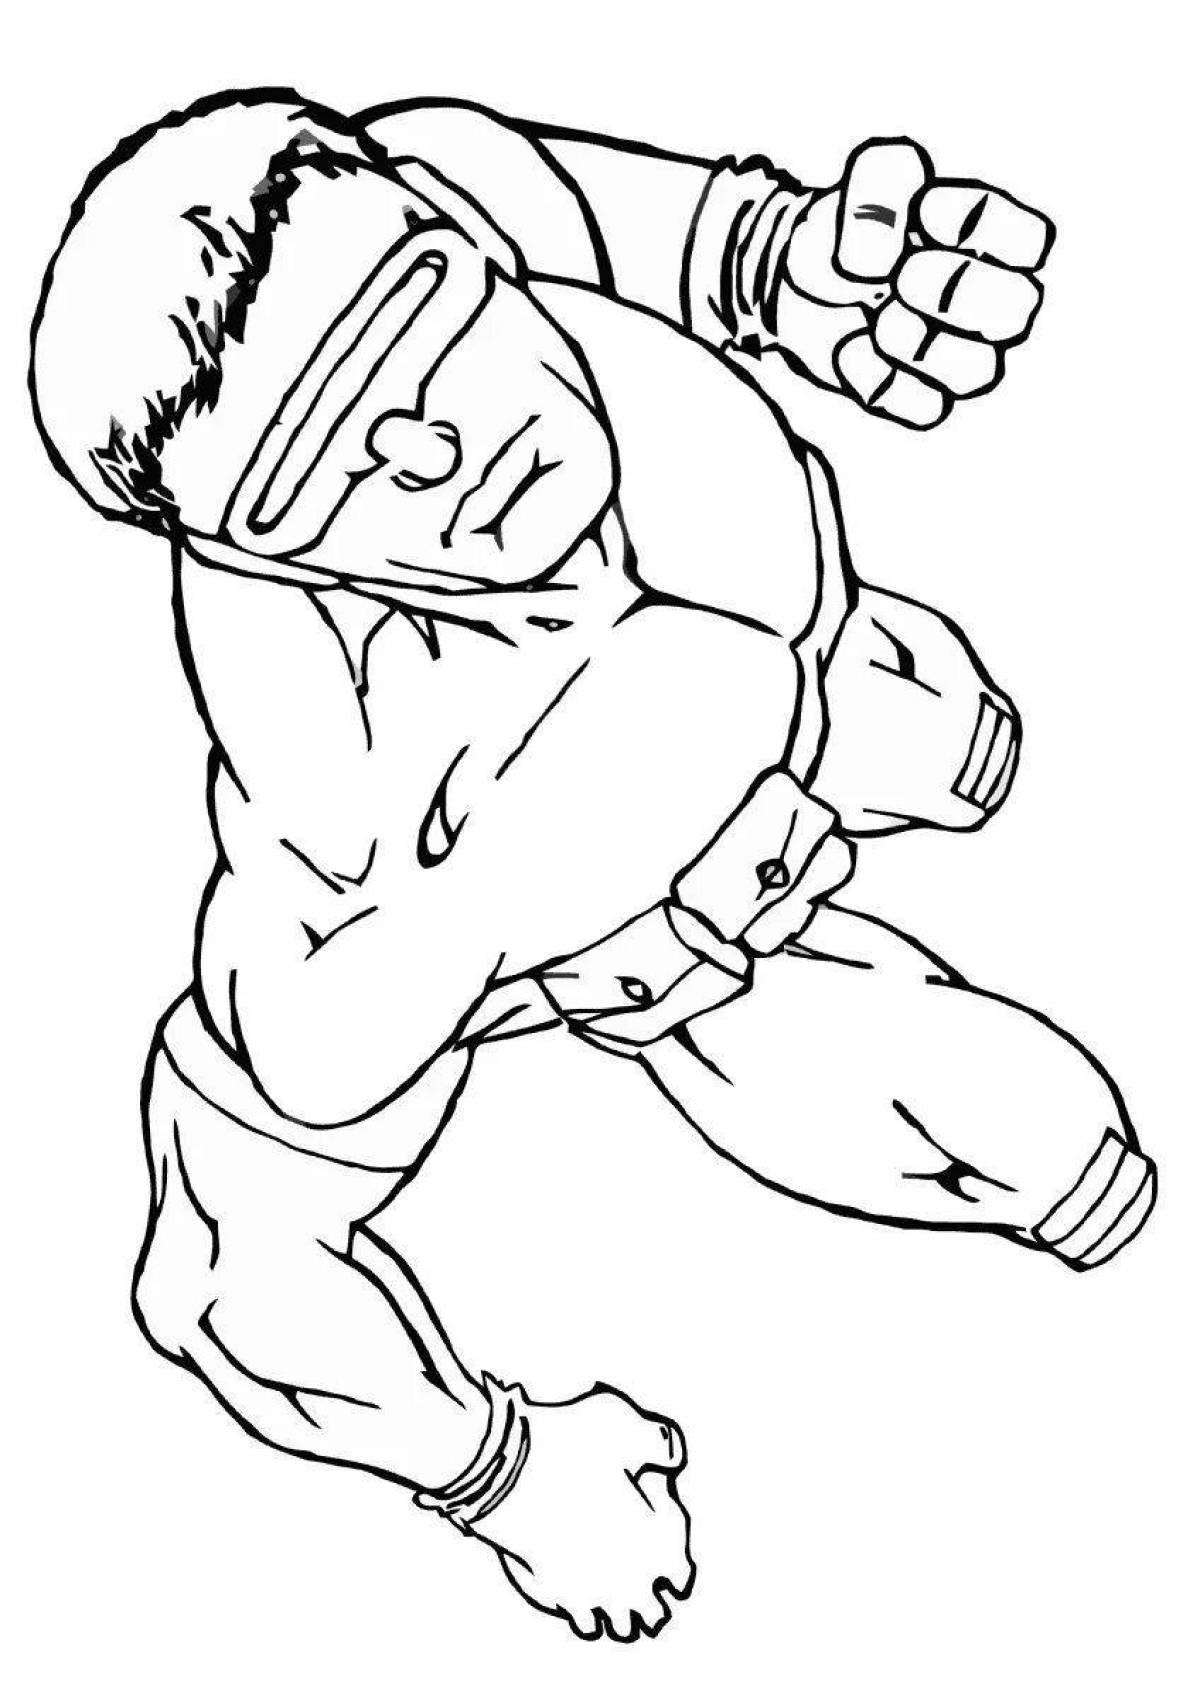 Glorious cyclops coloring page